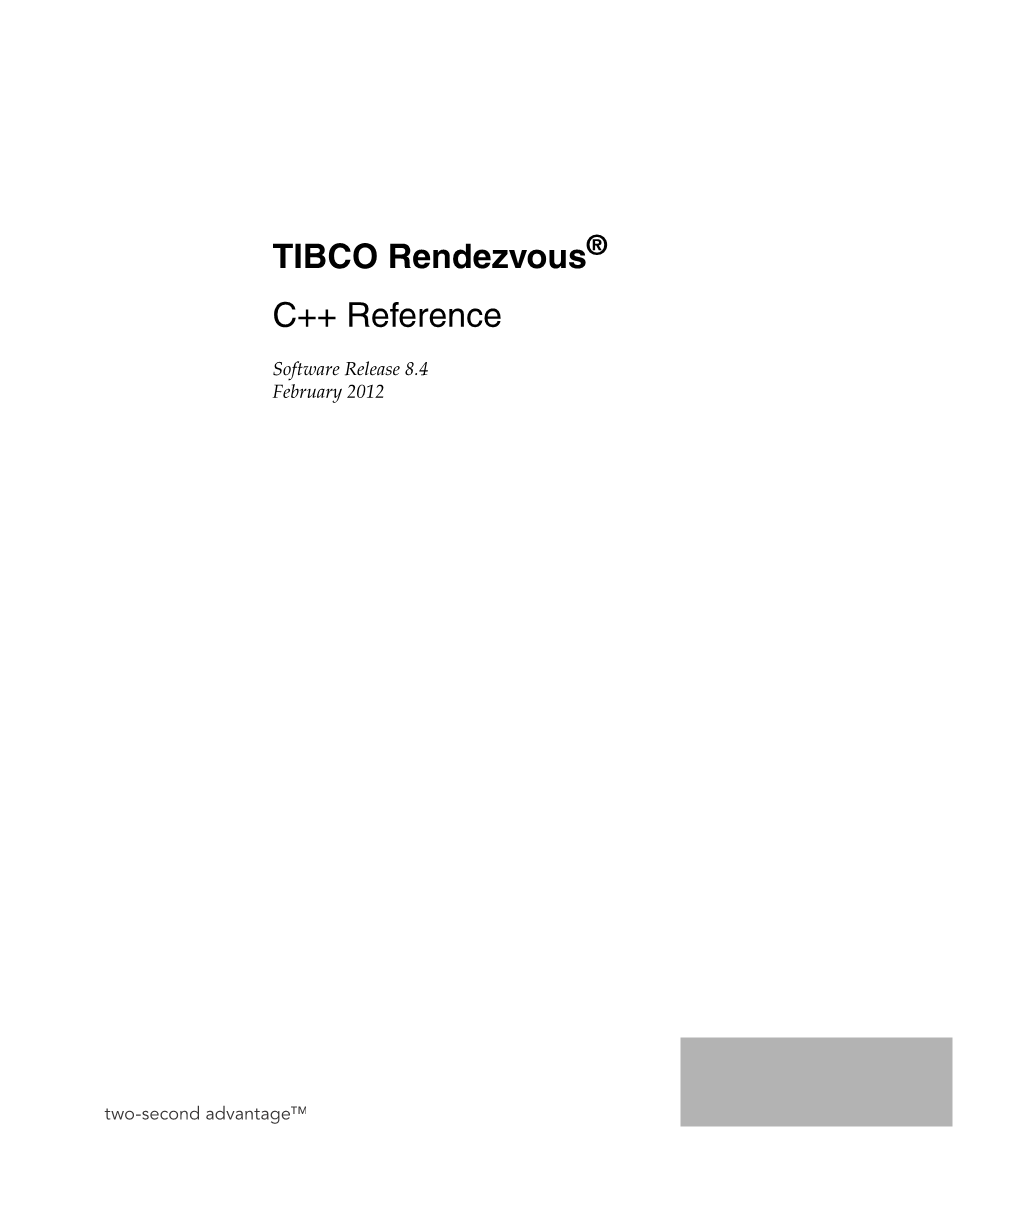 TIBCO Rendezvous® C++ Reference